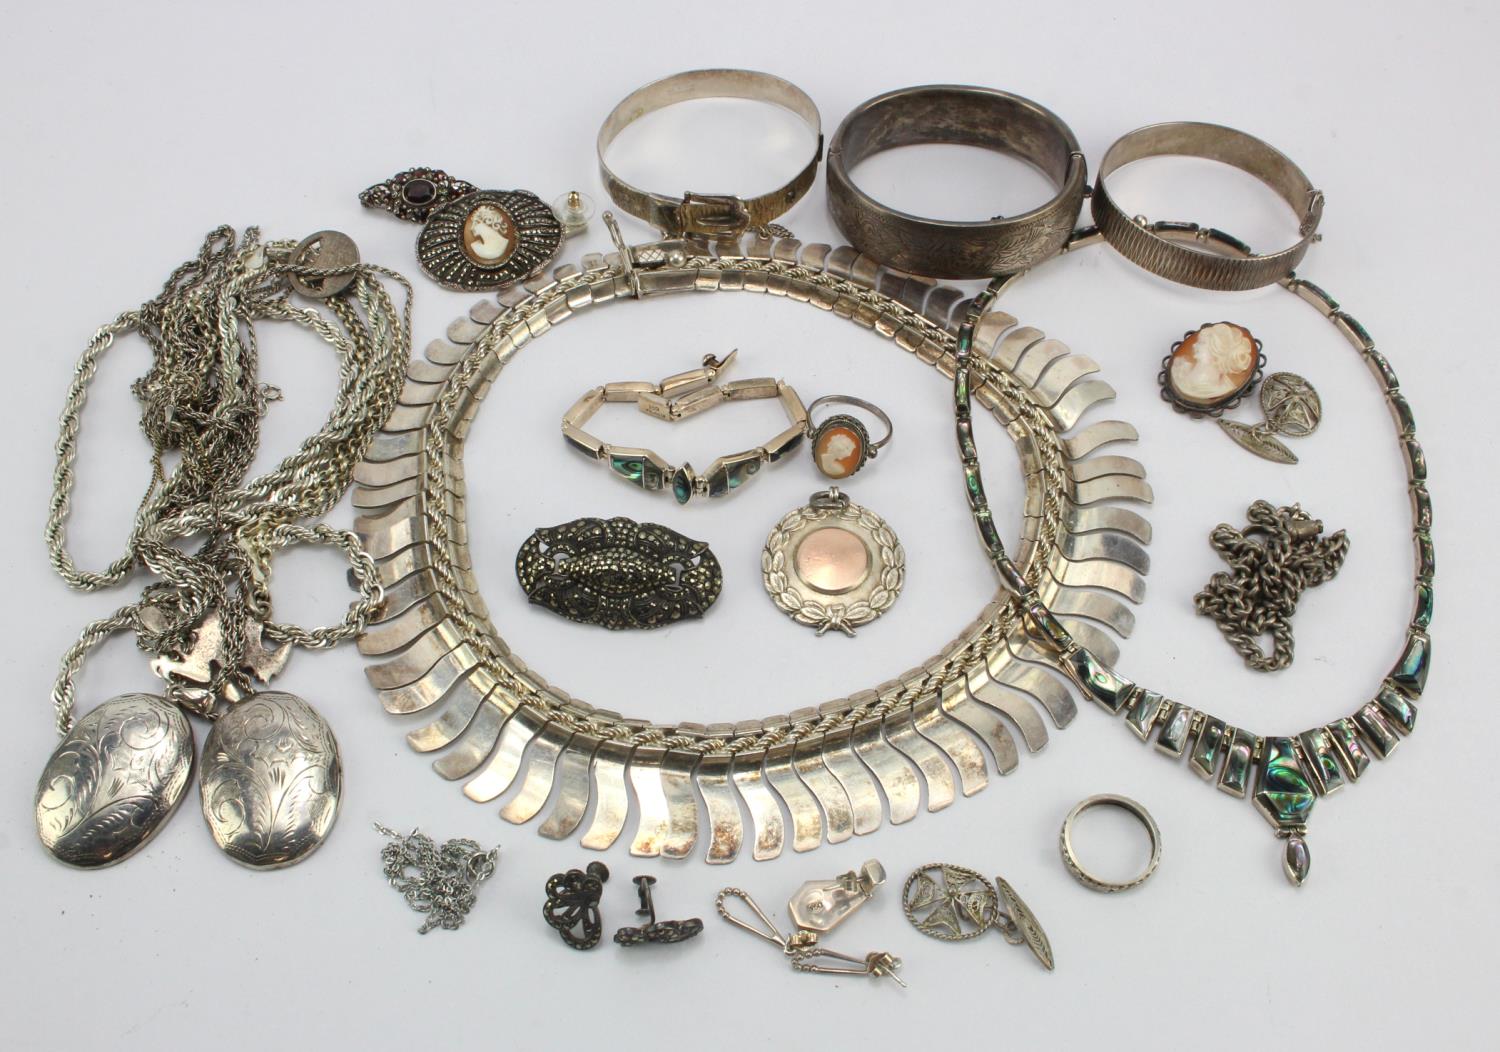 Assortment of silver/white metal jewellery, items include brooches, necklaces, vintage bangles,